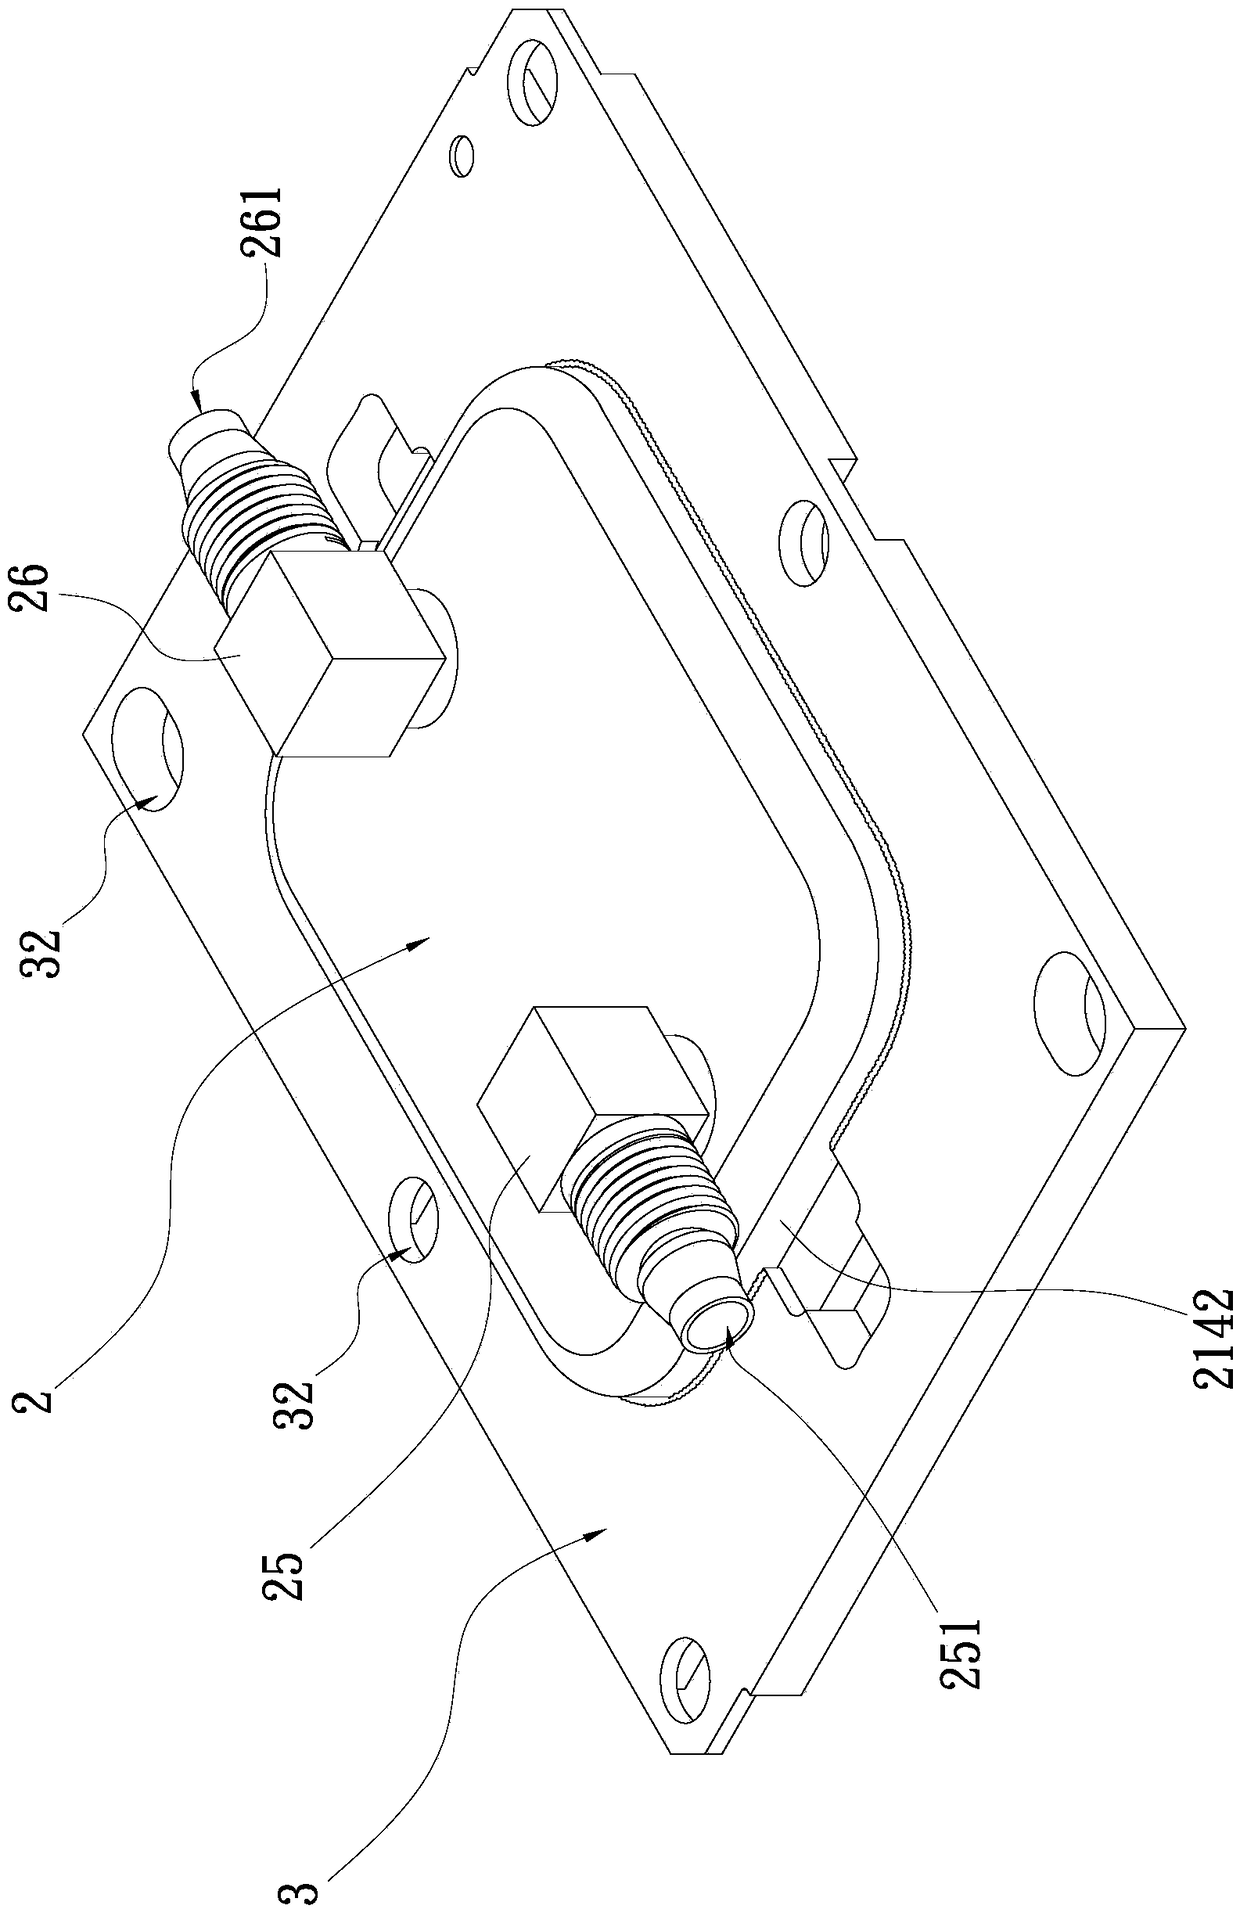 A water-cooled head buckle structure